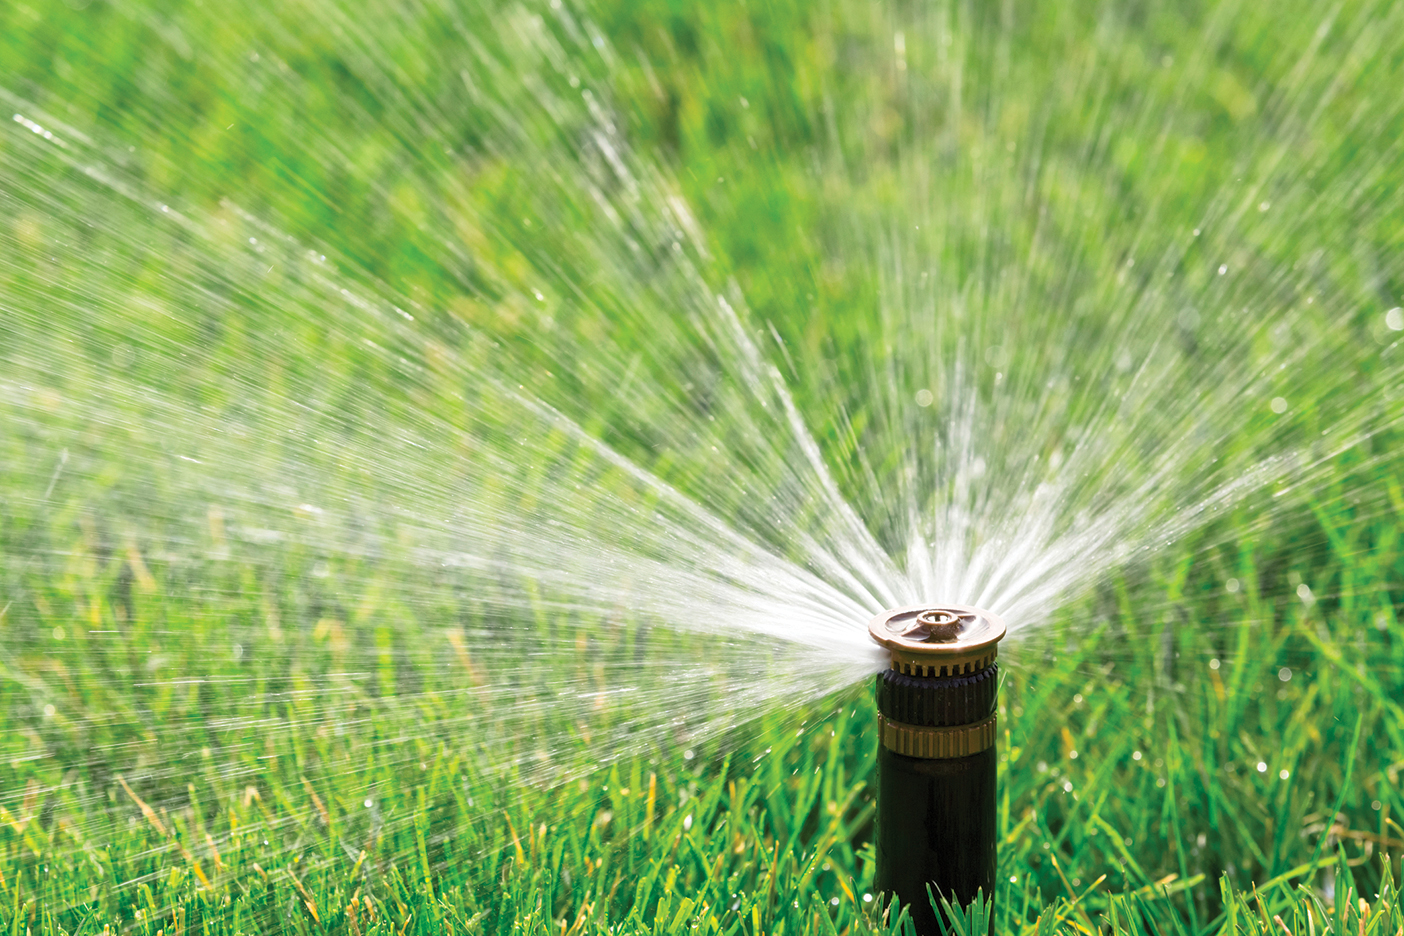 A tight shot of a sprinkler watering a lawn